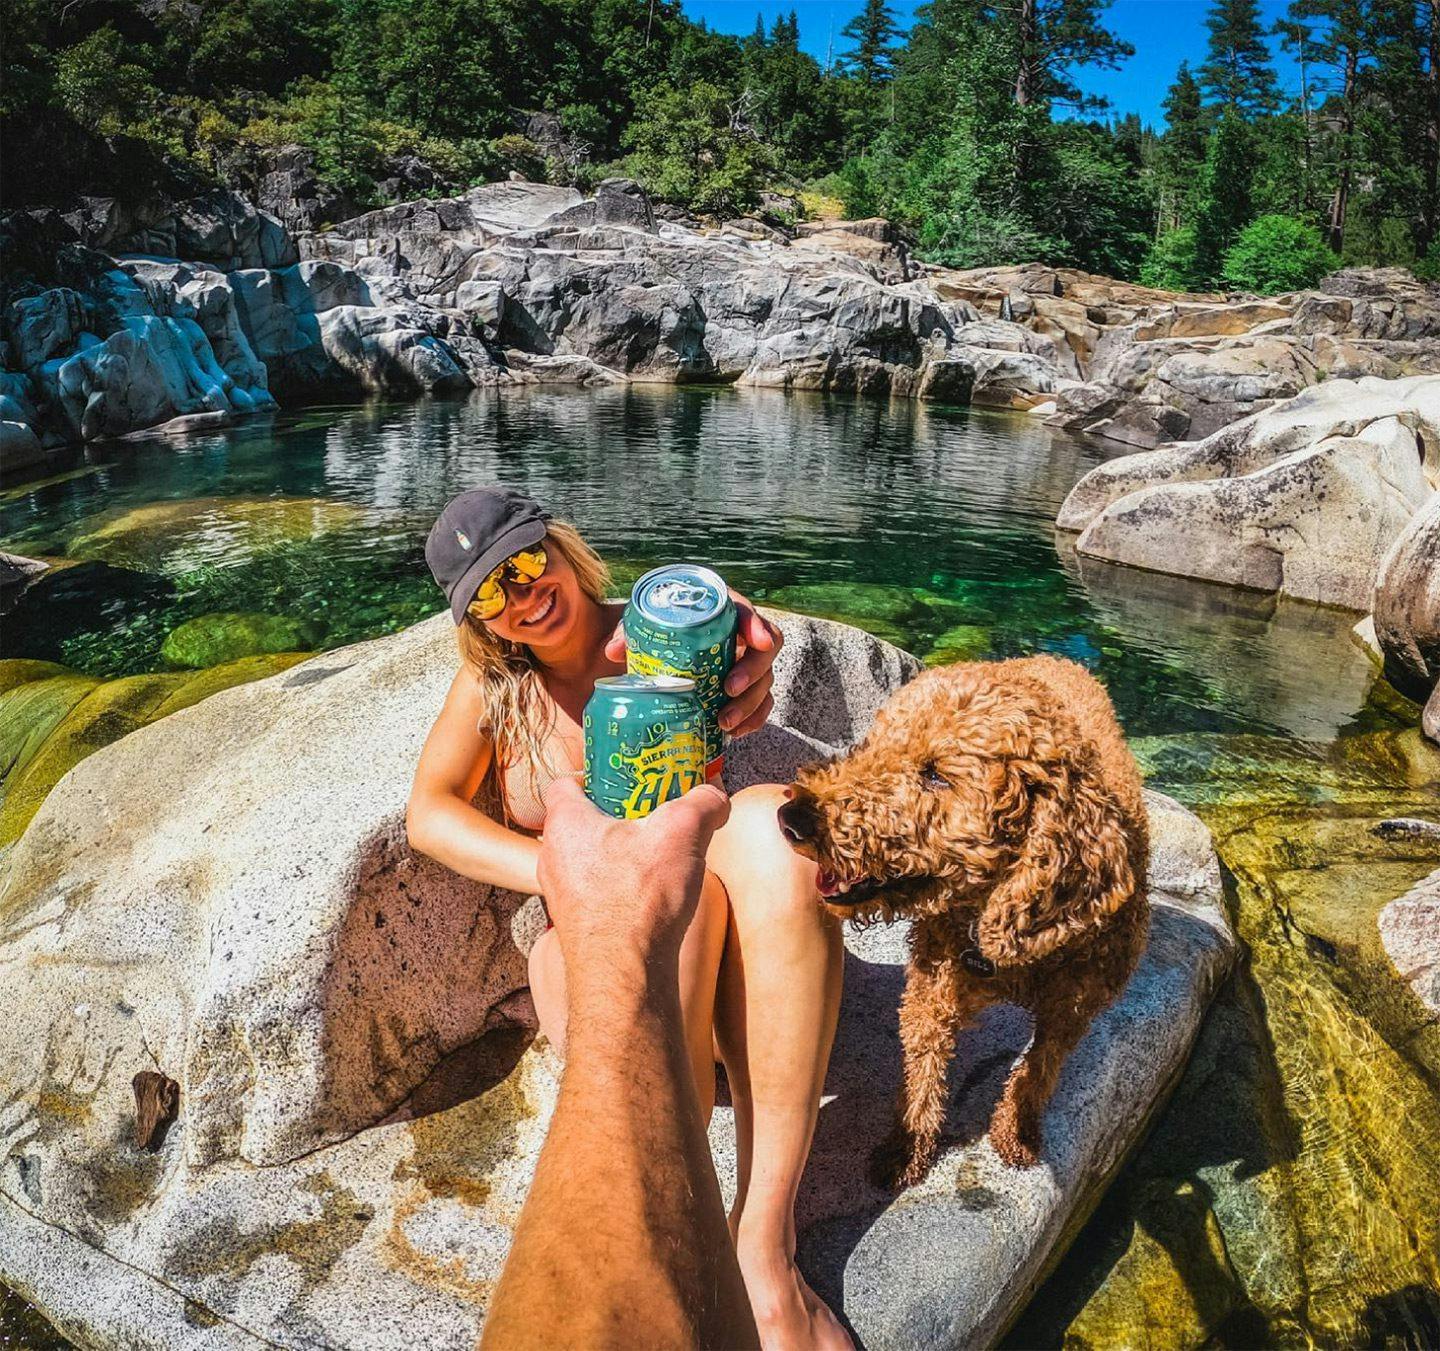 Woman with a dog sitting in the sunshine on a rock next to a lake while toasting someone with a can of Hazy Little Things IPA beer